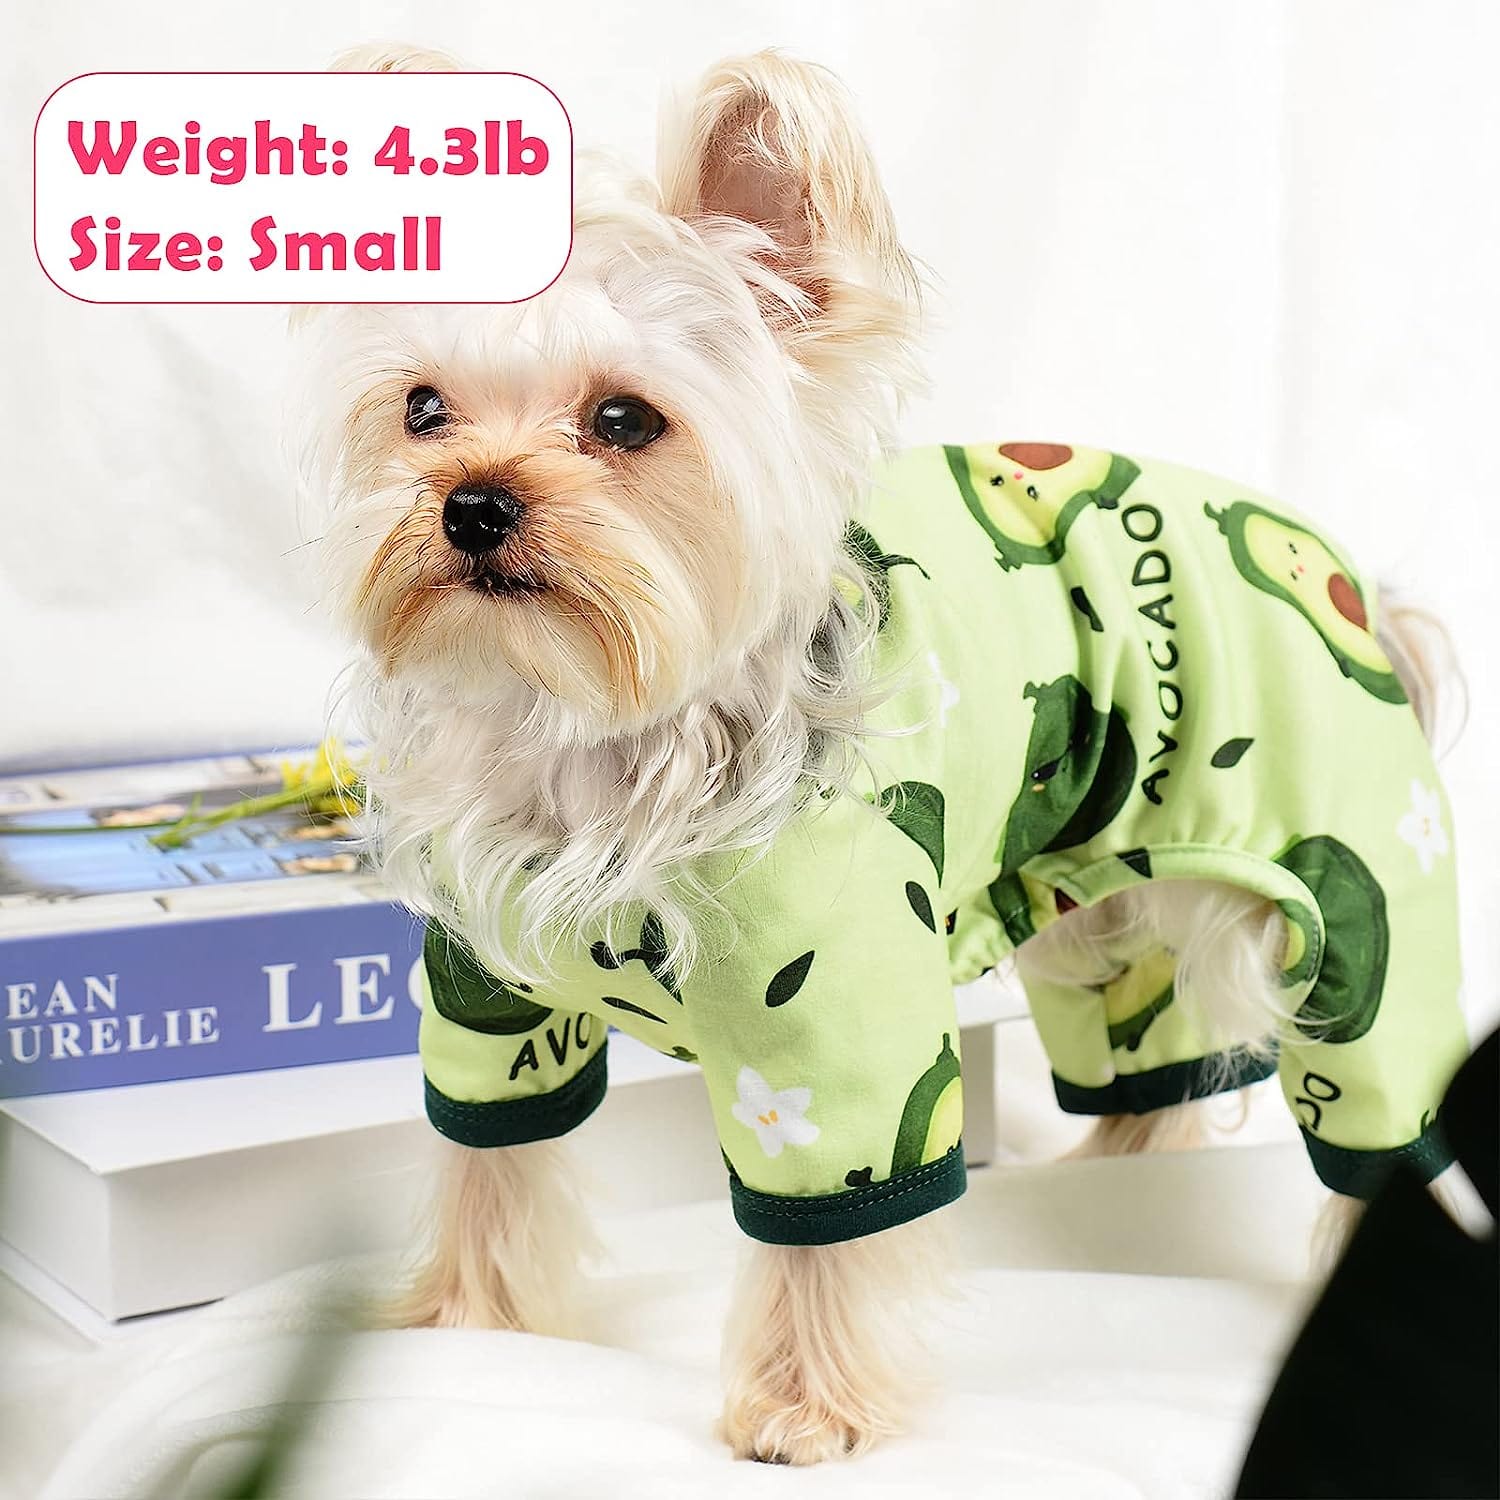 KUTKUT Small Dog Cat Bodysuit Pjs Spring Summer Autumn Dog Clothes for Puppies Cat Girl, Boy -Soft Stretchy Clothes Doggie Onesies Cat Pet Jammies For ShihTzu, Maltese - kutkutstyle